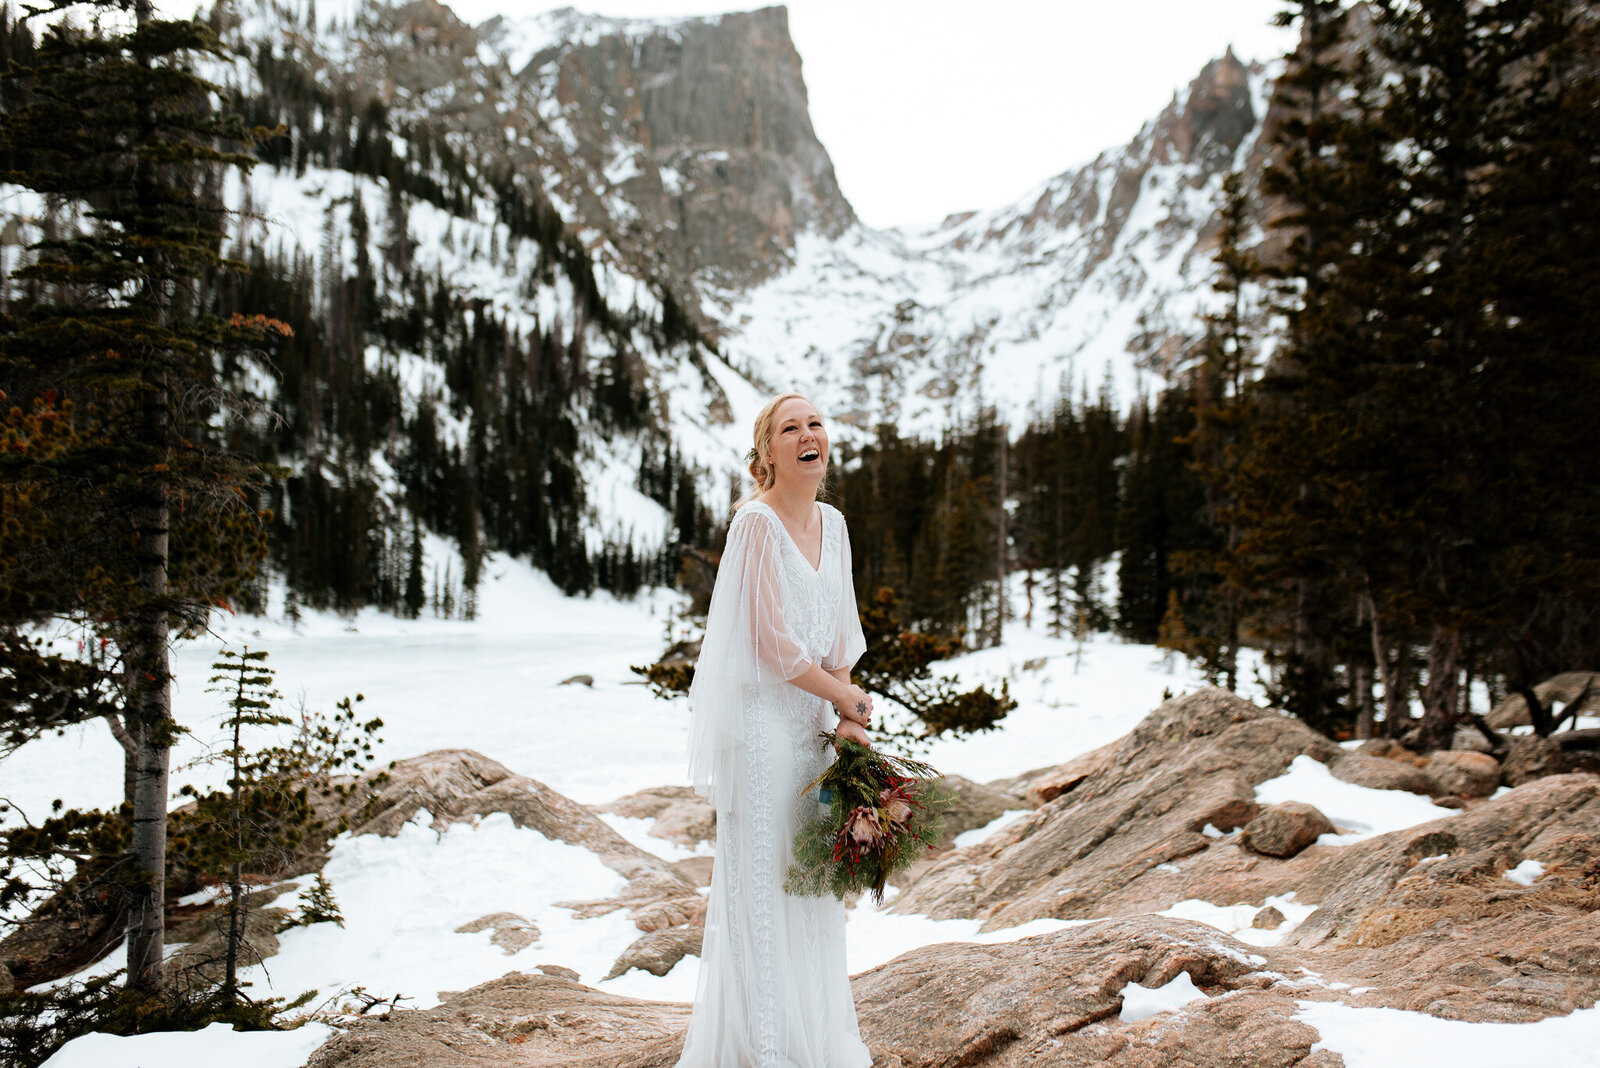 Bride in the snow at her winter wedding in Rocky Mountain National Park at Hallet's peak in Colorado.